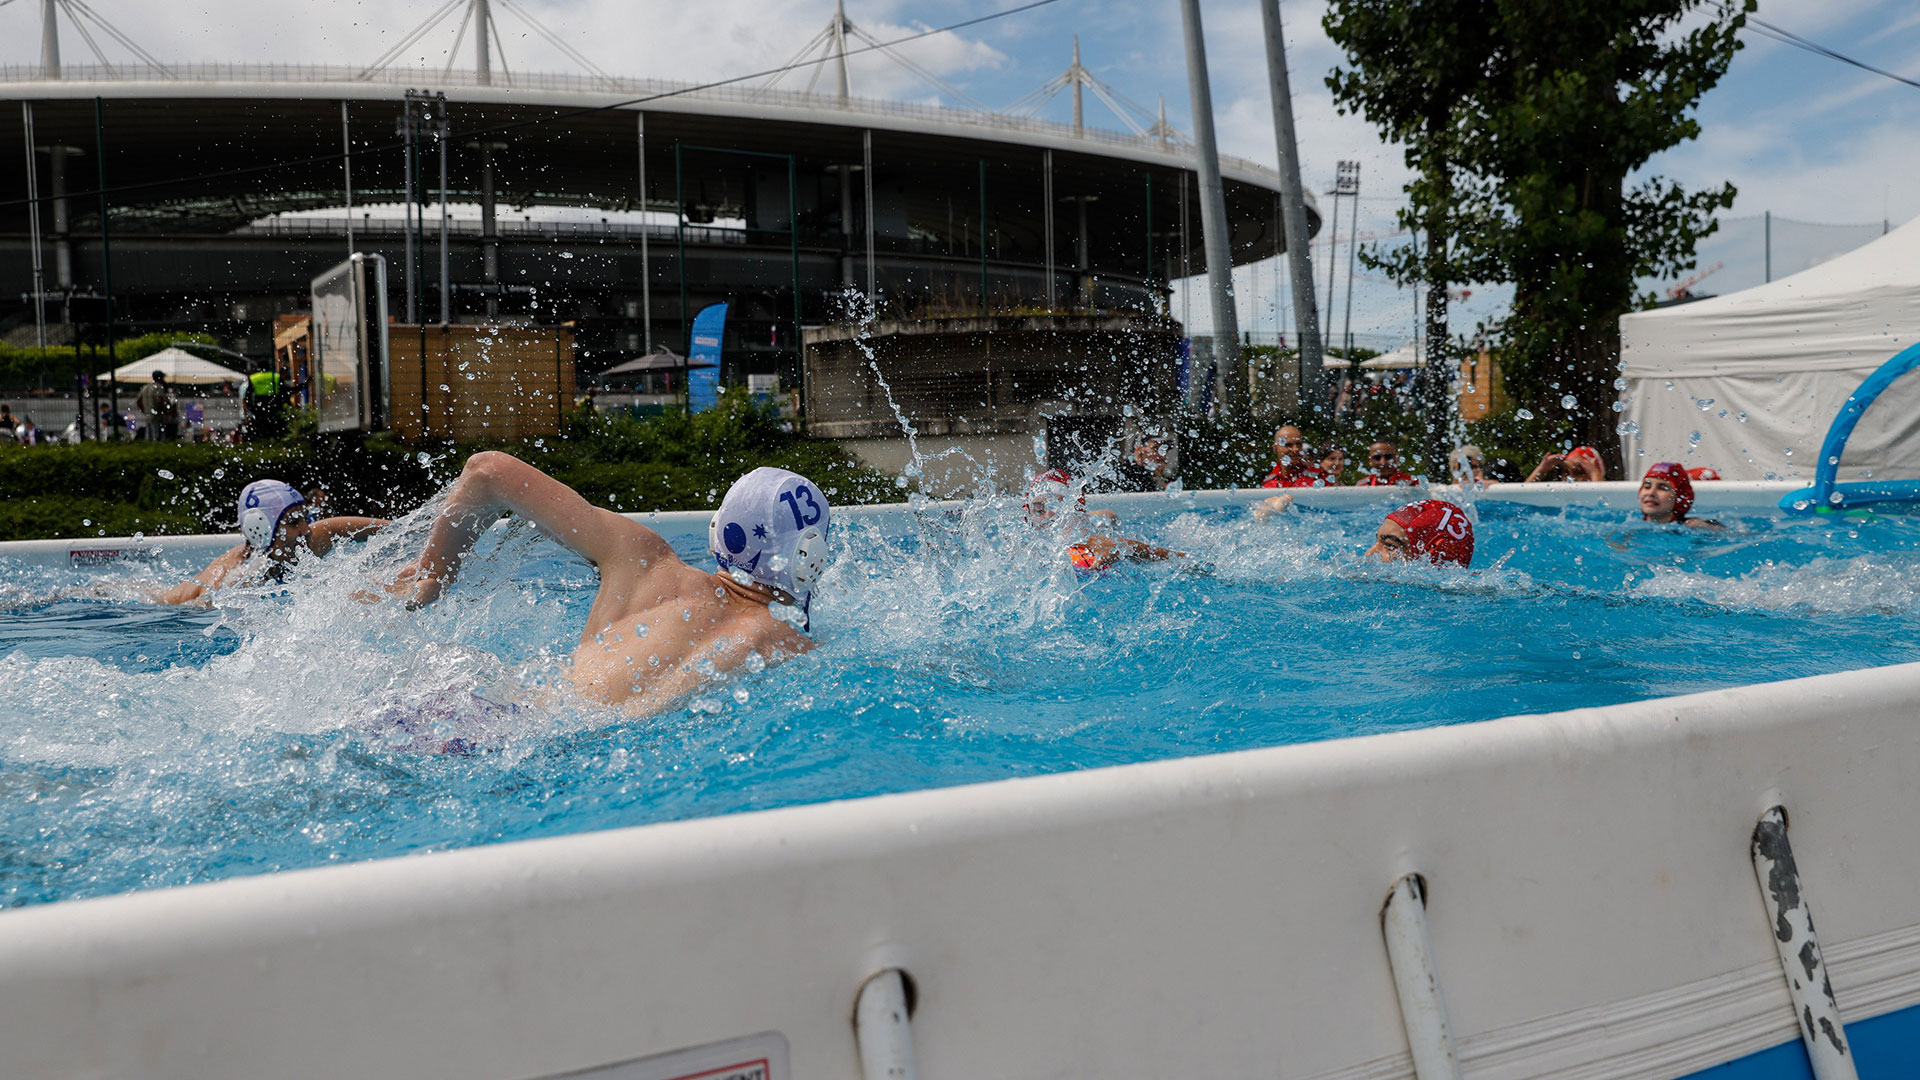 Water polo was one of more than 30 Olympic sports showcased at Olympic Day, in the shadow of the Stade de France (Paris 2024)